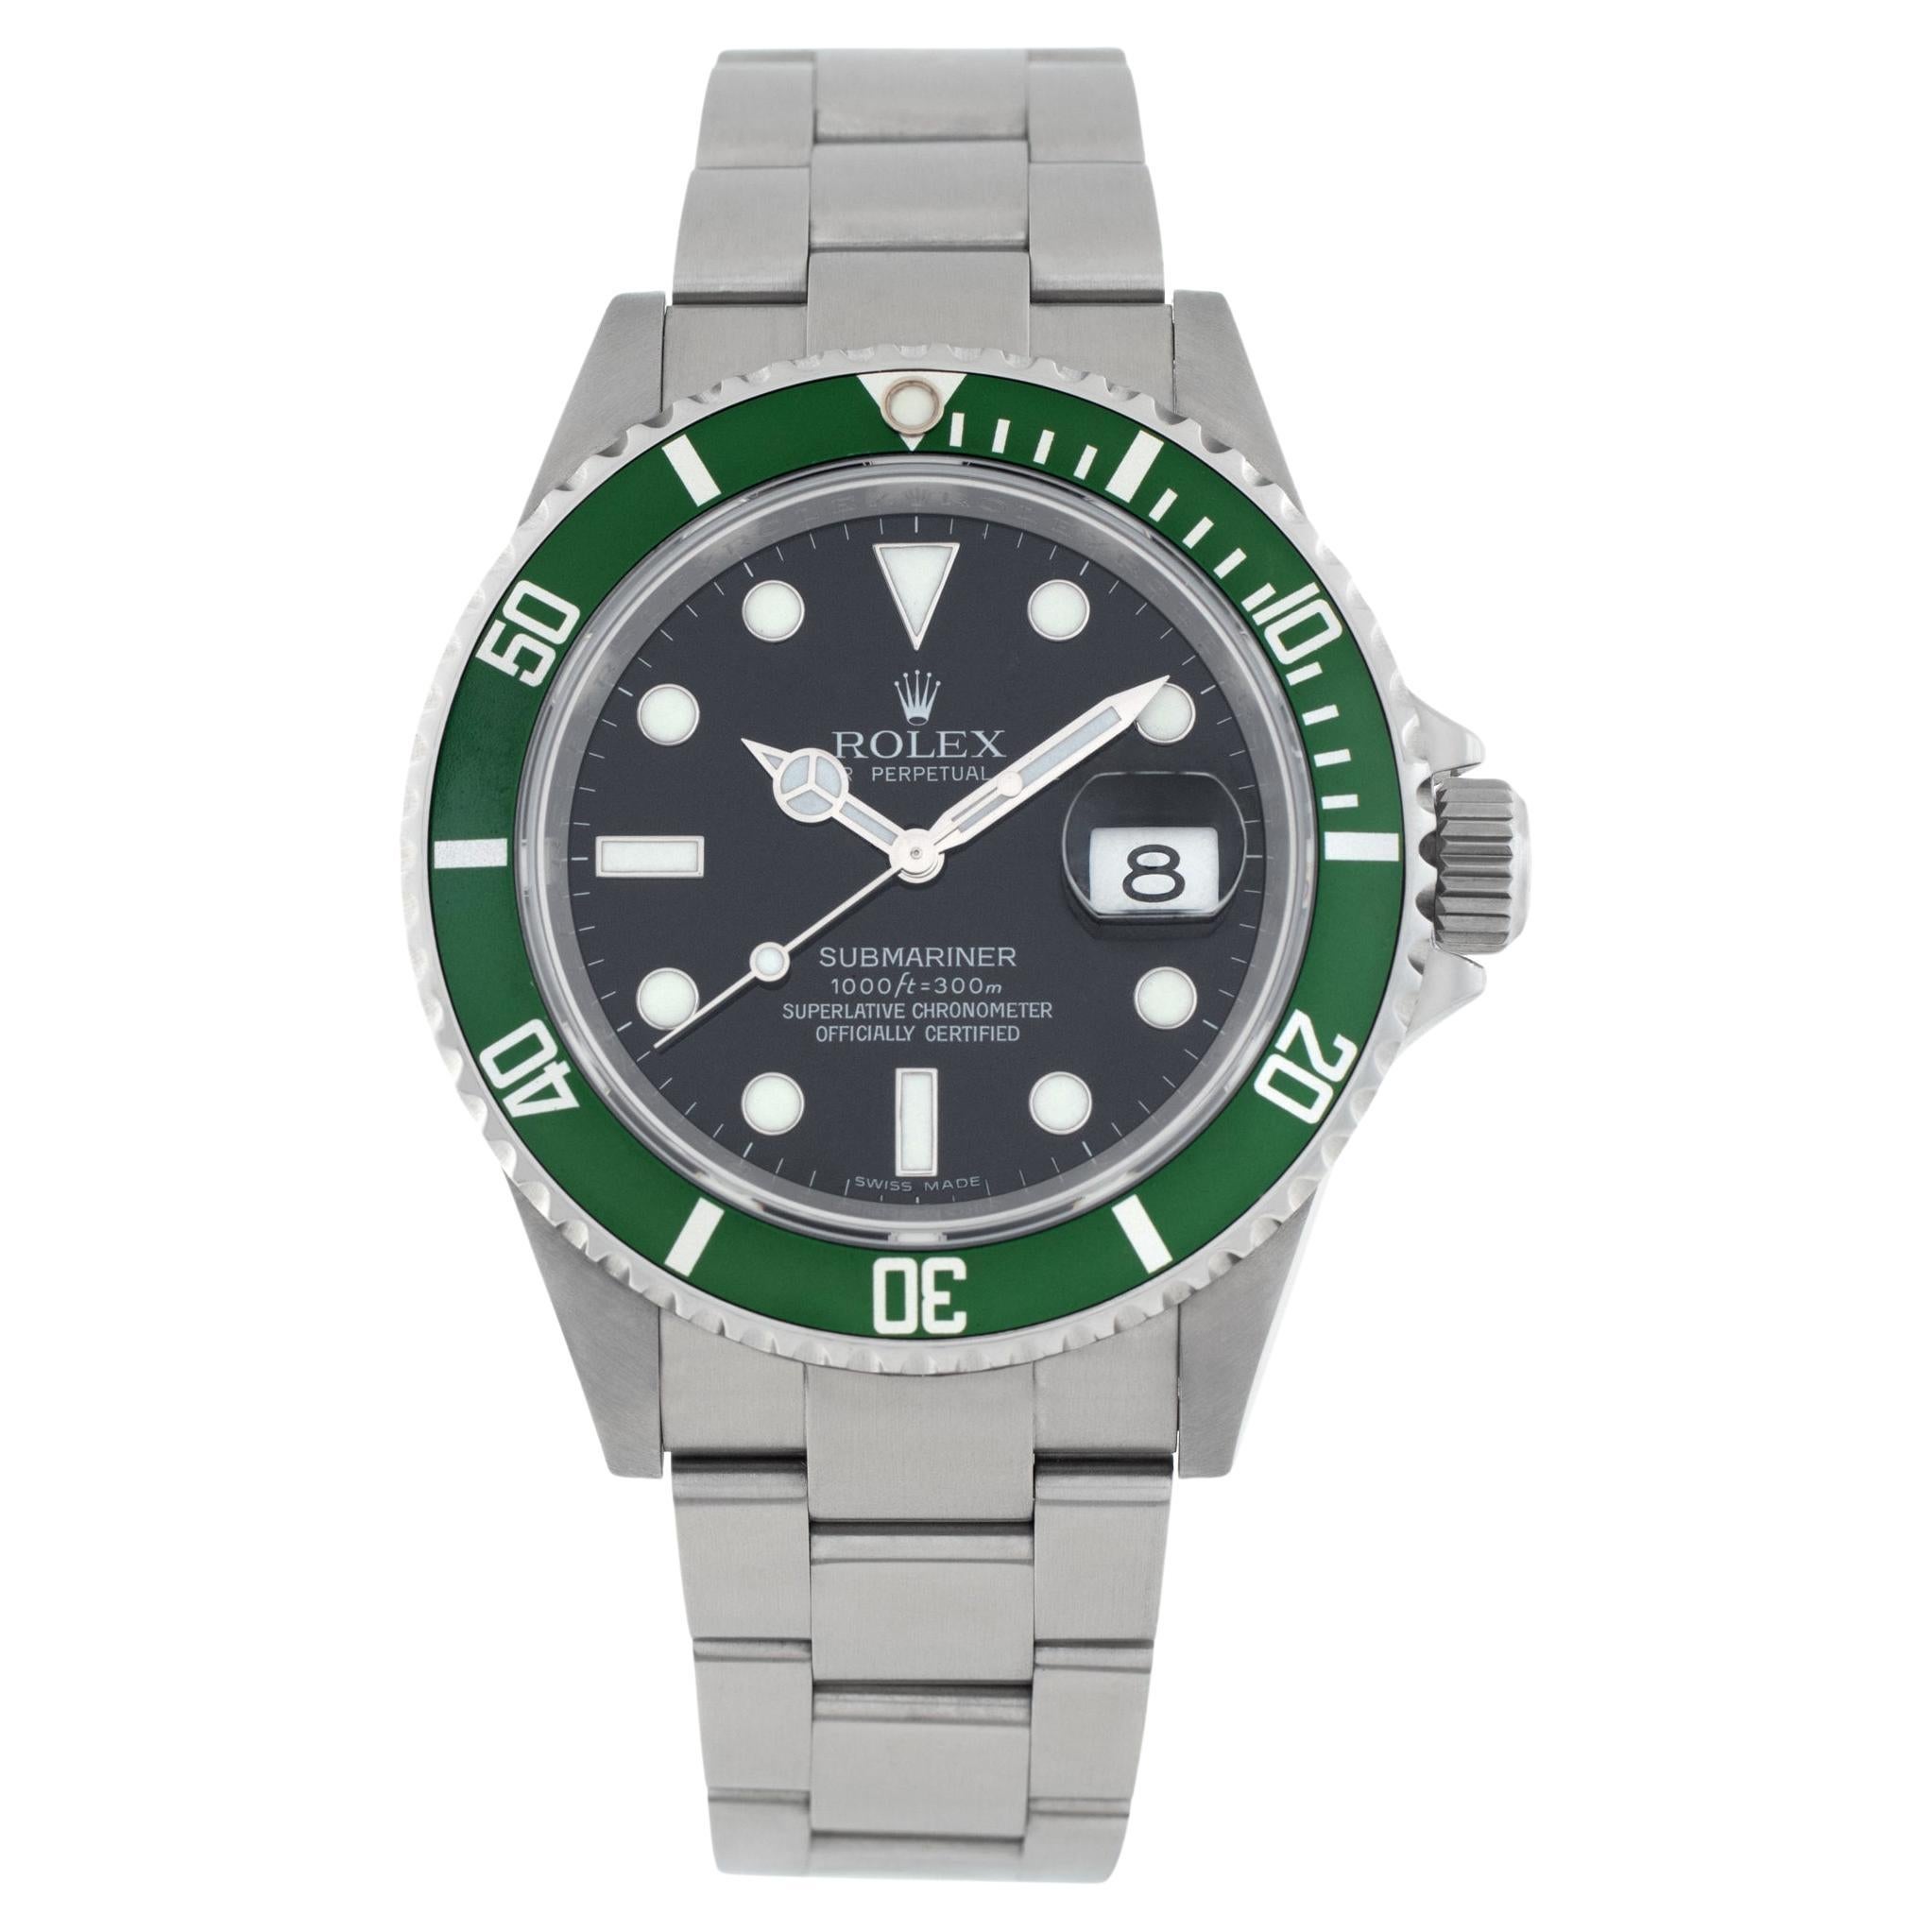 Rolex Submariner Kermit 16610lv Stainless Steel Black dial 40mm Automatic watch